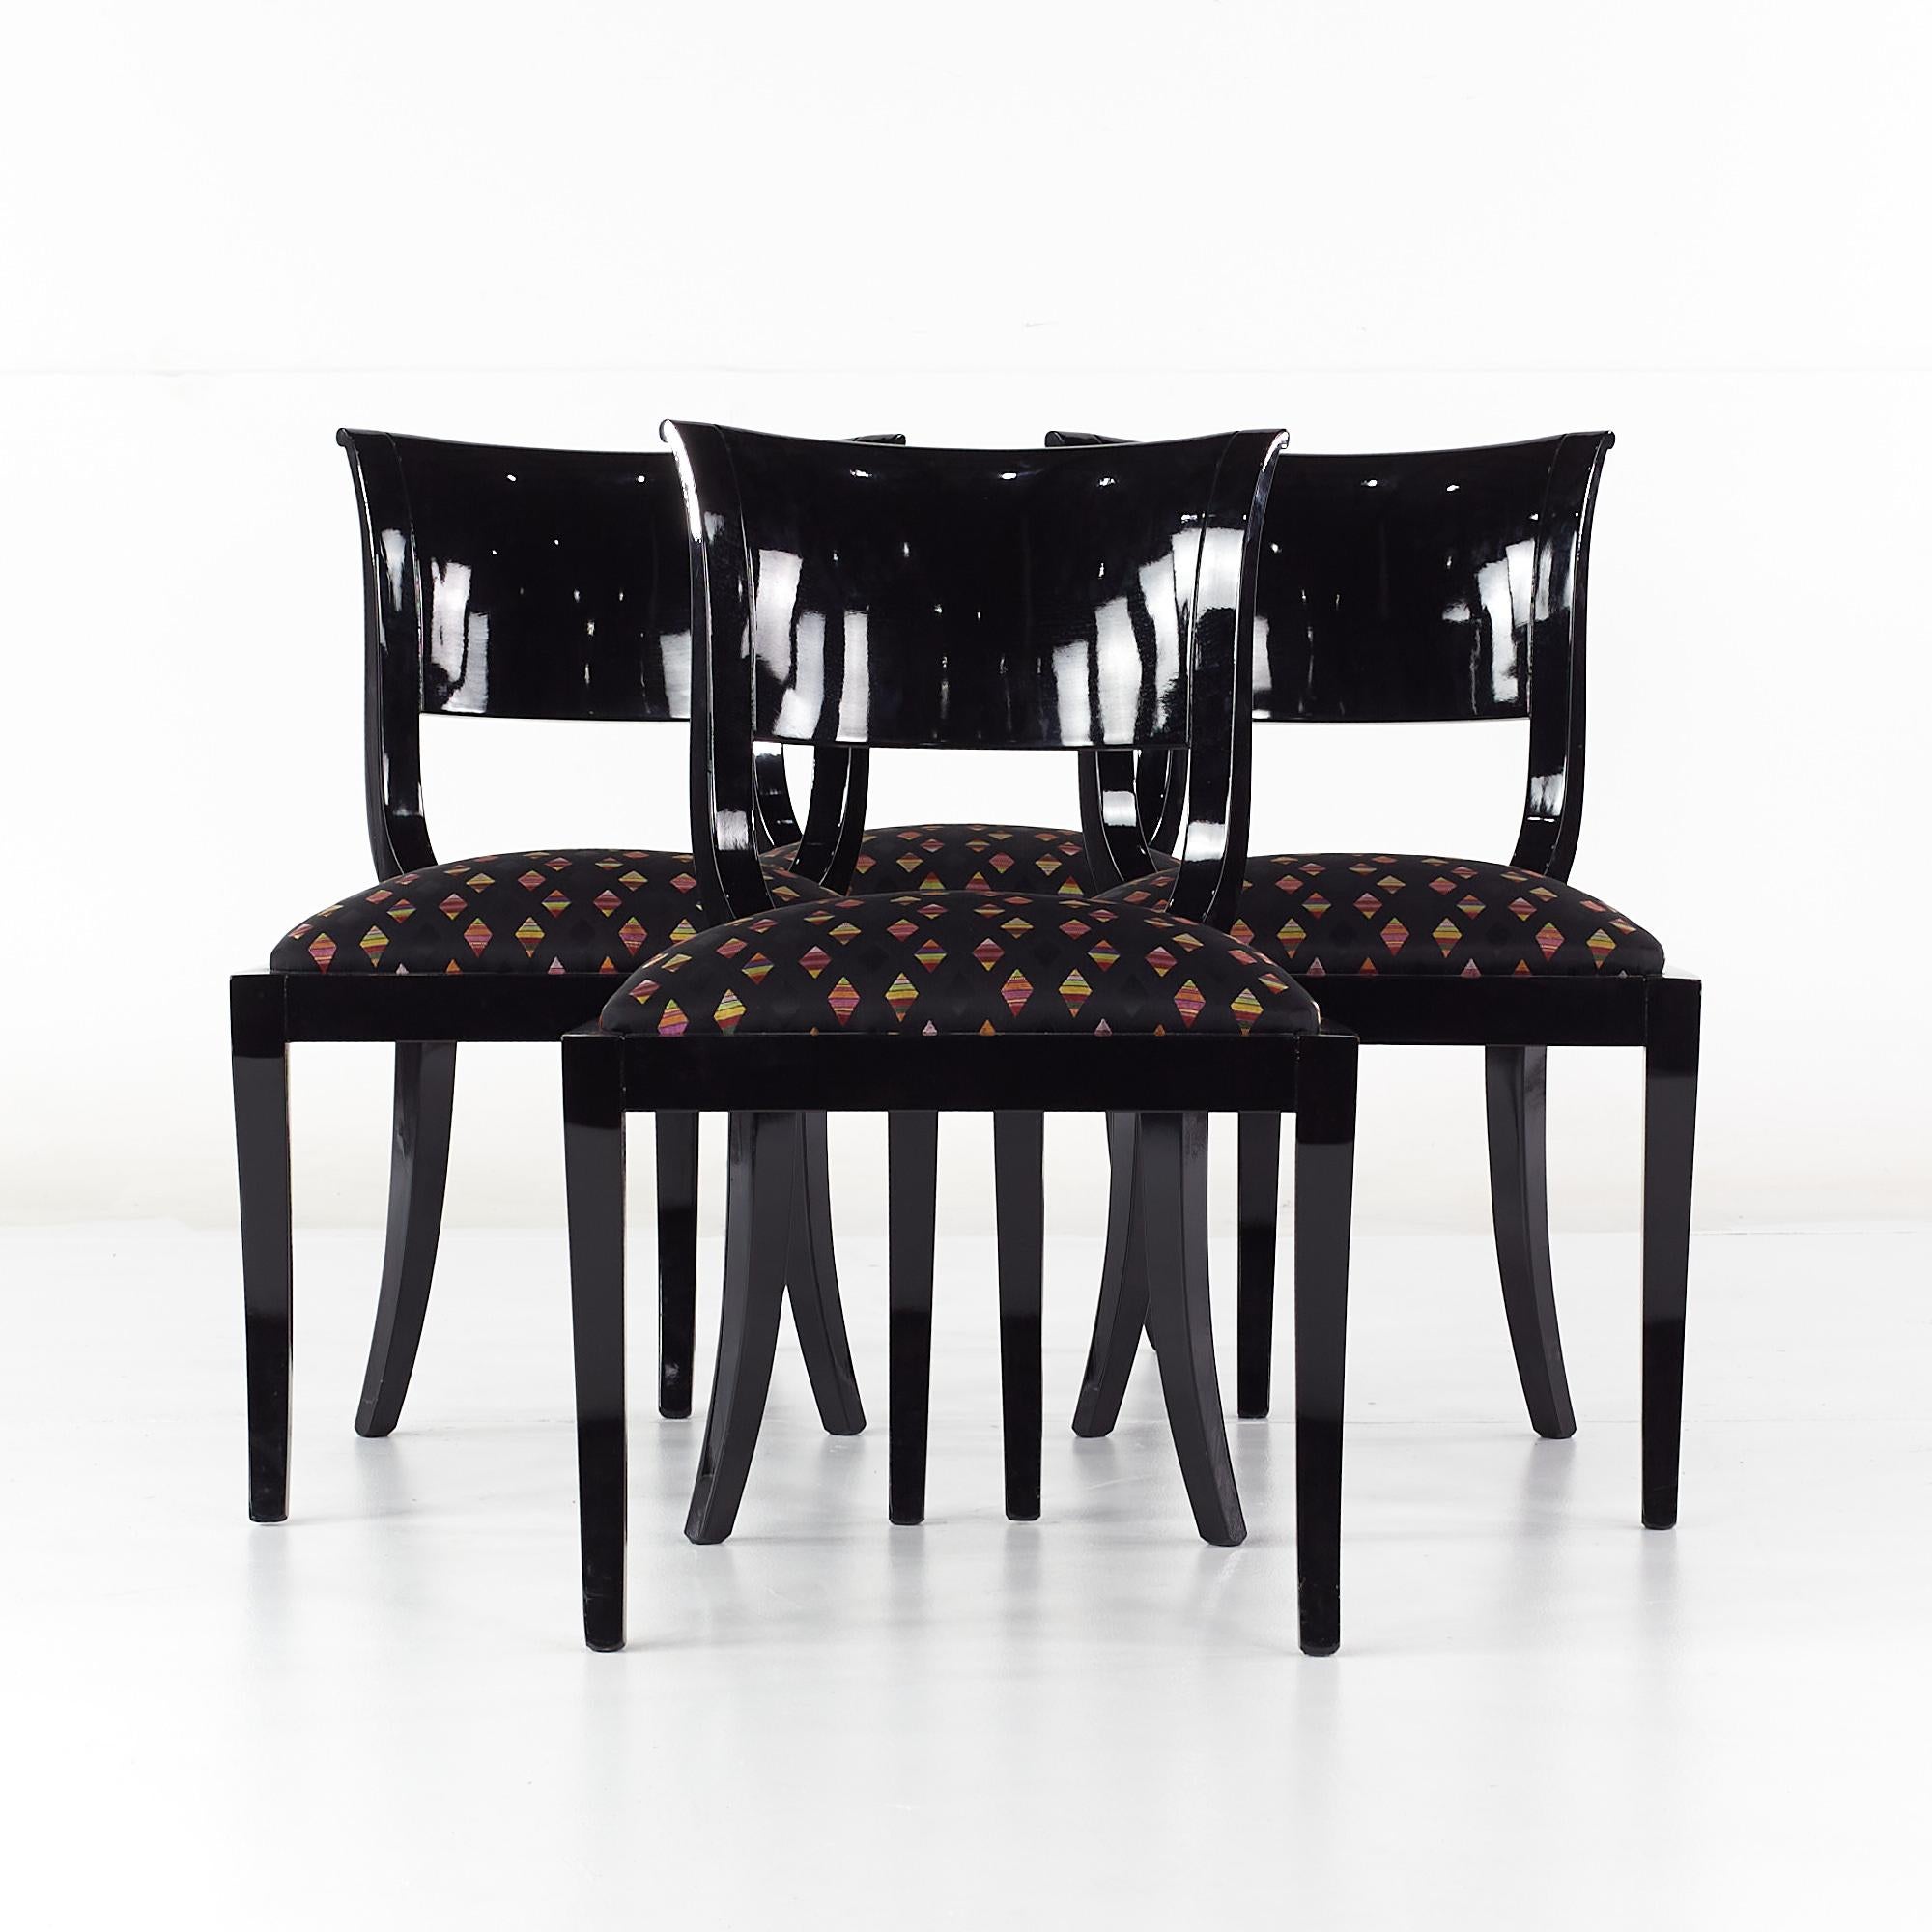 Klismos Style Mid Century Black Lacquer dining chairs - Set of 4

These chairs measure: 21.5 wide x 18.5 deep x 32.5 inches high, with a seat height/chair clearance of 19 inches

All pieces of furniture can be had in what we call restored